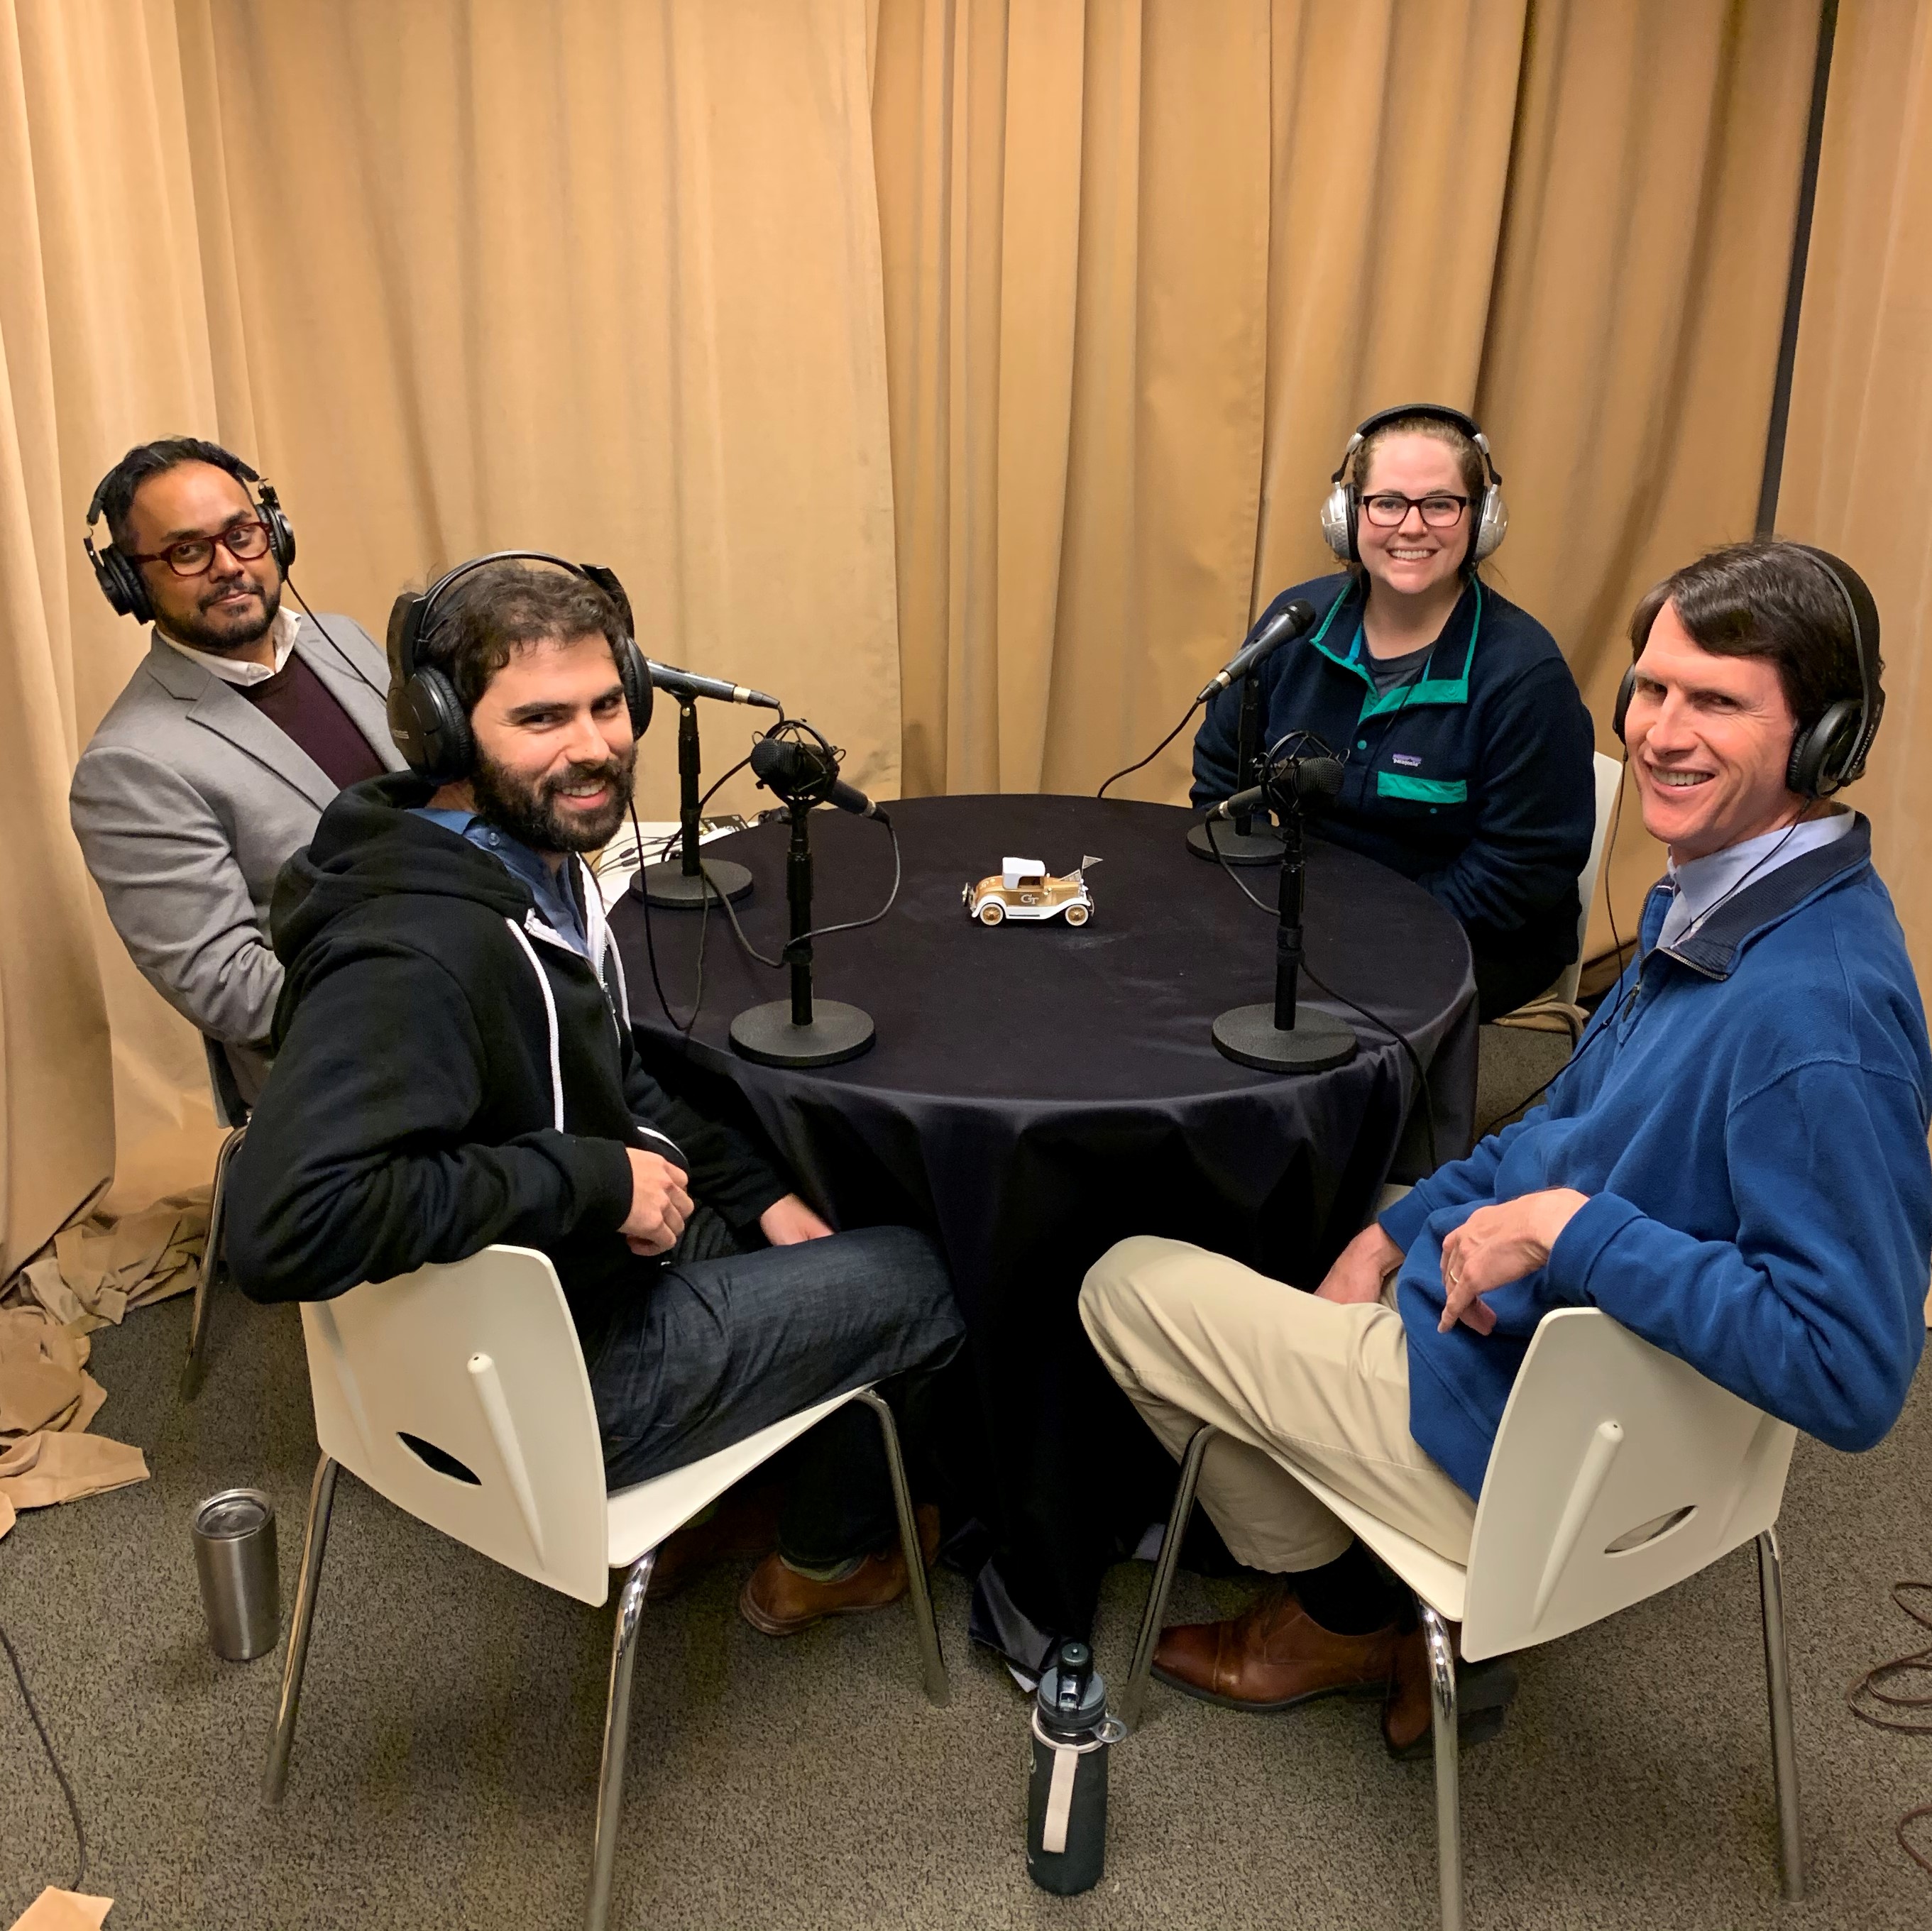 (From left) Saurabh Bose, Ben Rosenthal, host Jasmine Howard, and Dr. Eric Overby join us on our ramblin' roundtable podcast discussing hot topics in FinTech.